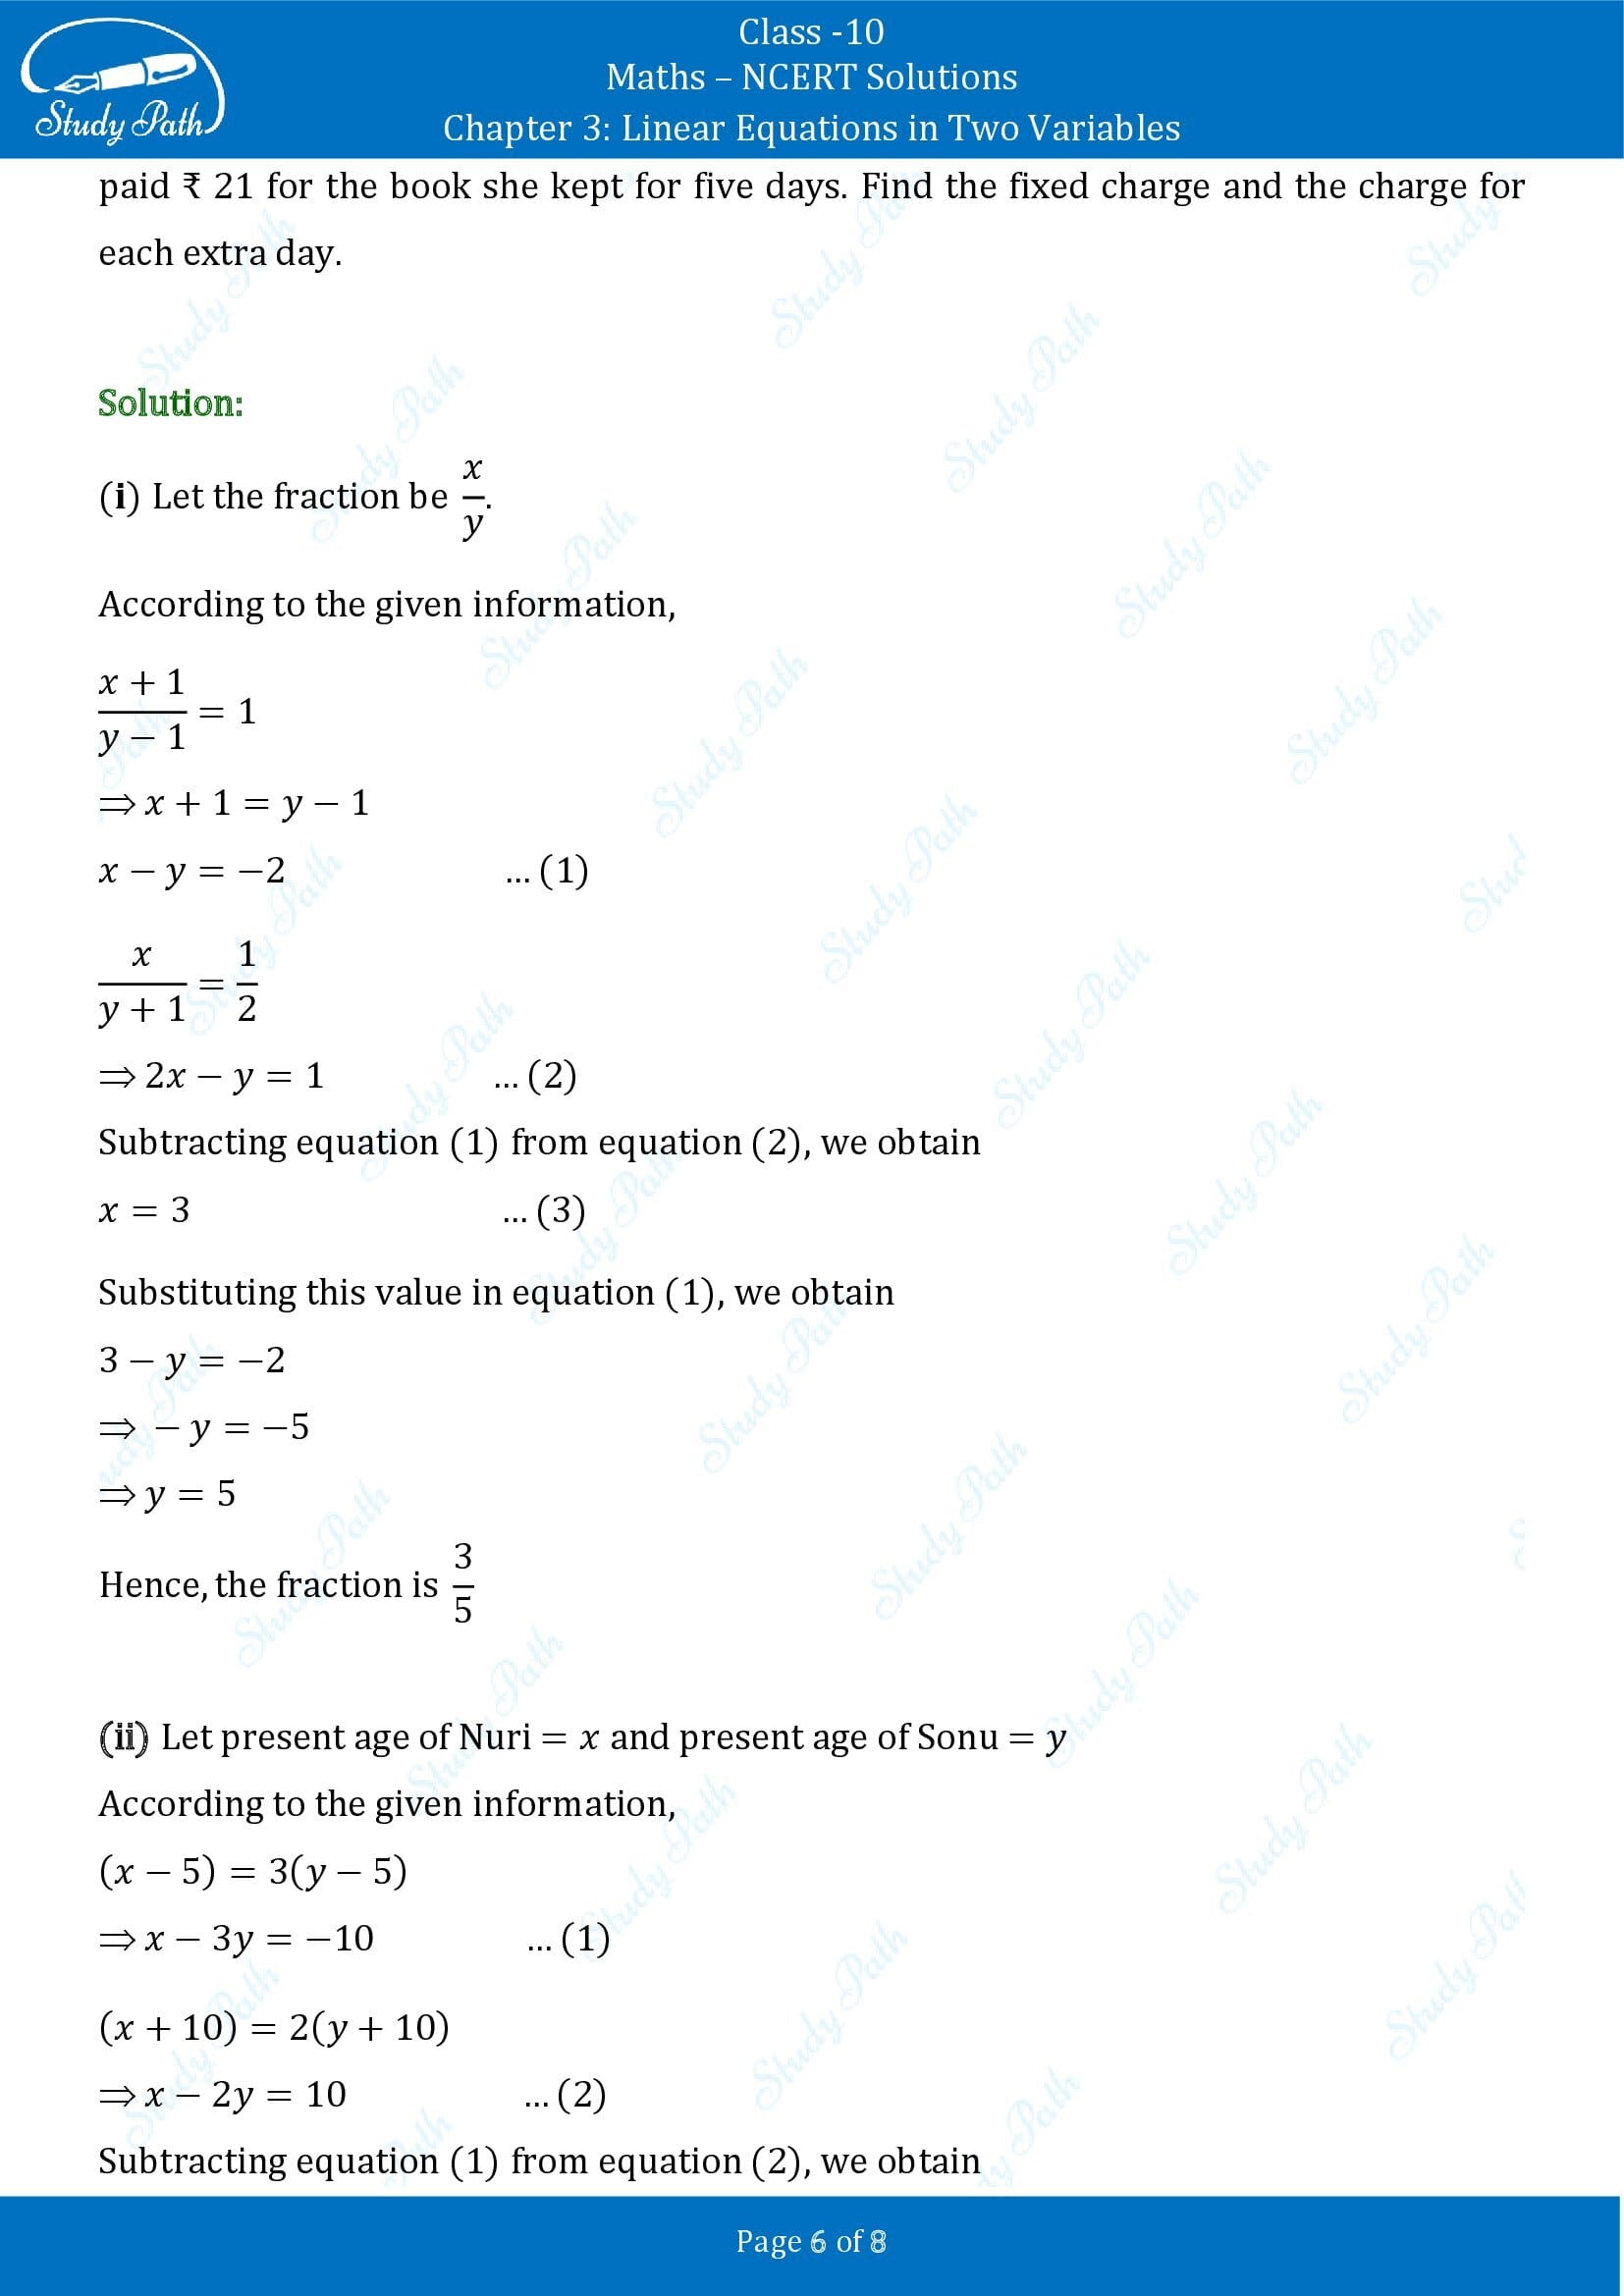 NCERT Solutions for Class 10 Maths Chapter 3 Linear Equations in Two Variables Exercise 3.4 00006